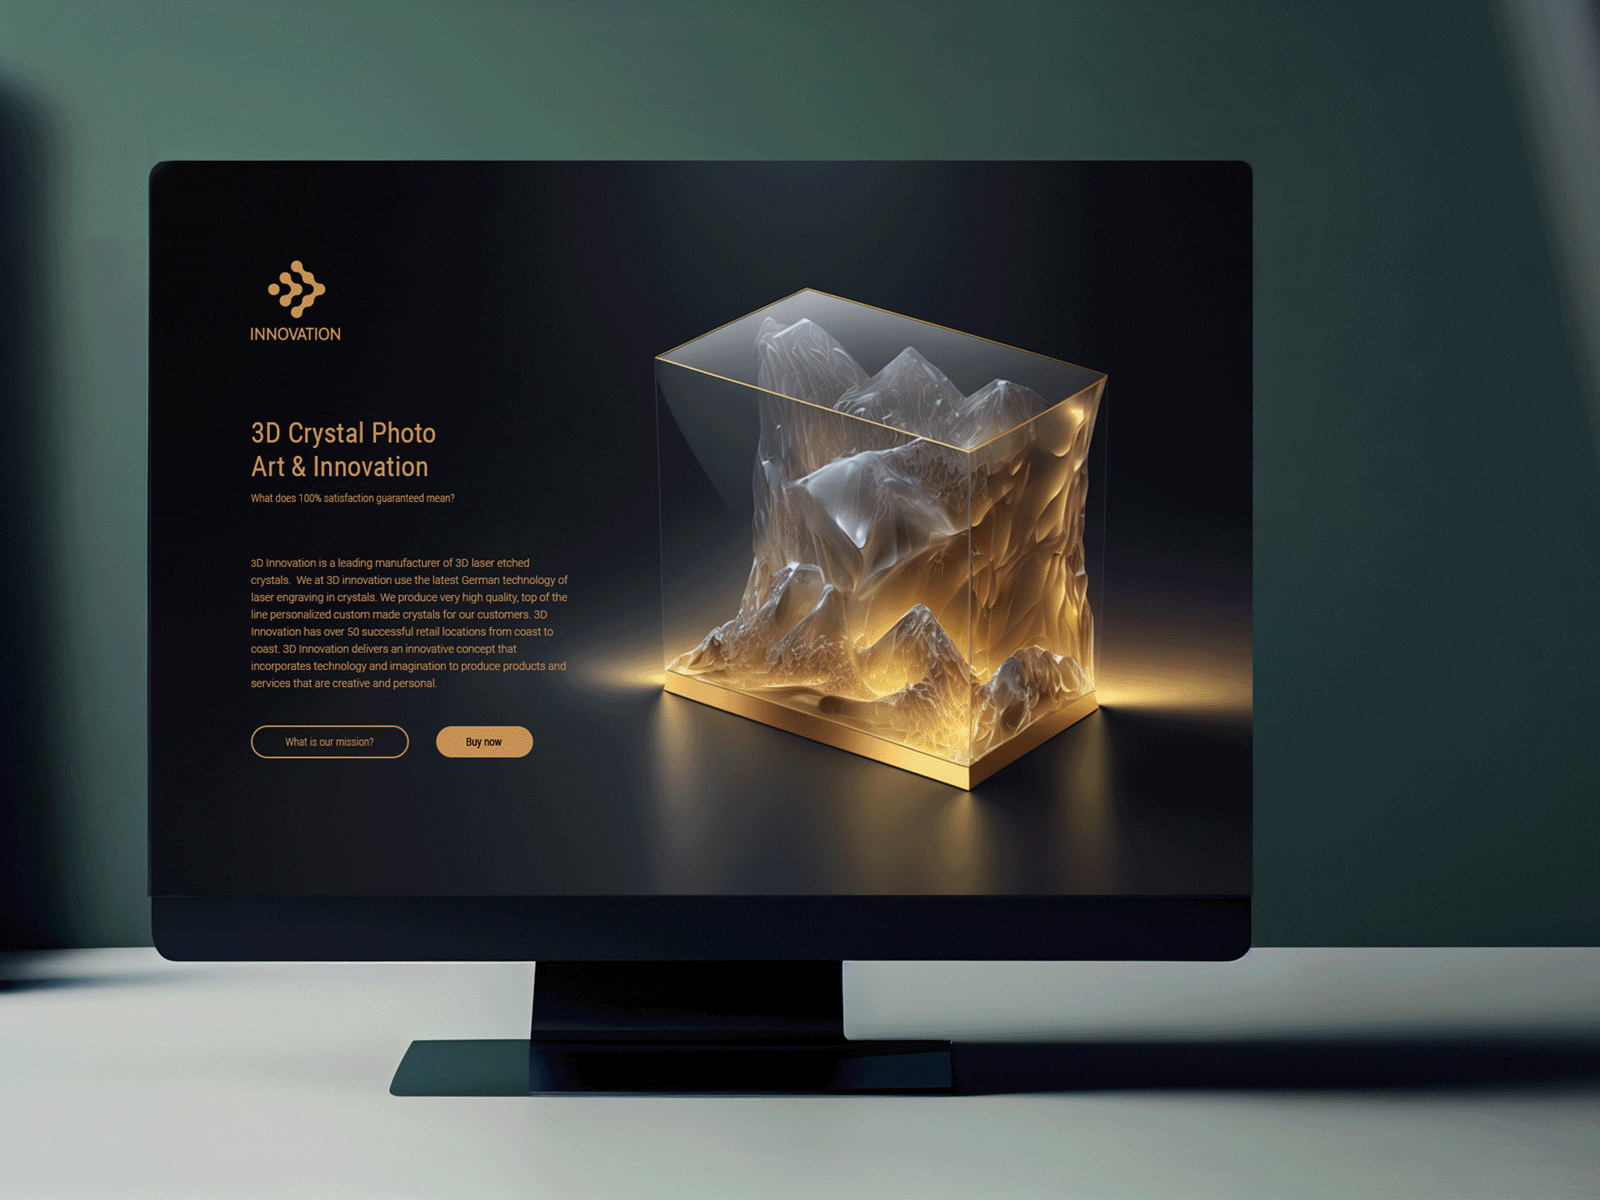 Innovation 3D Crystal Photo landing page